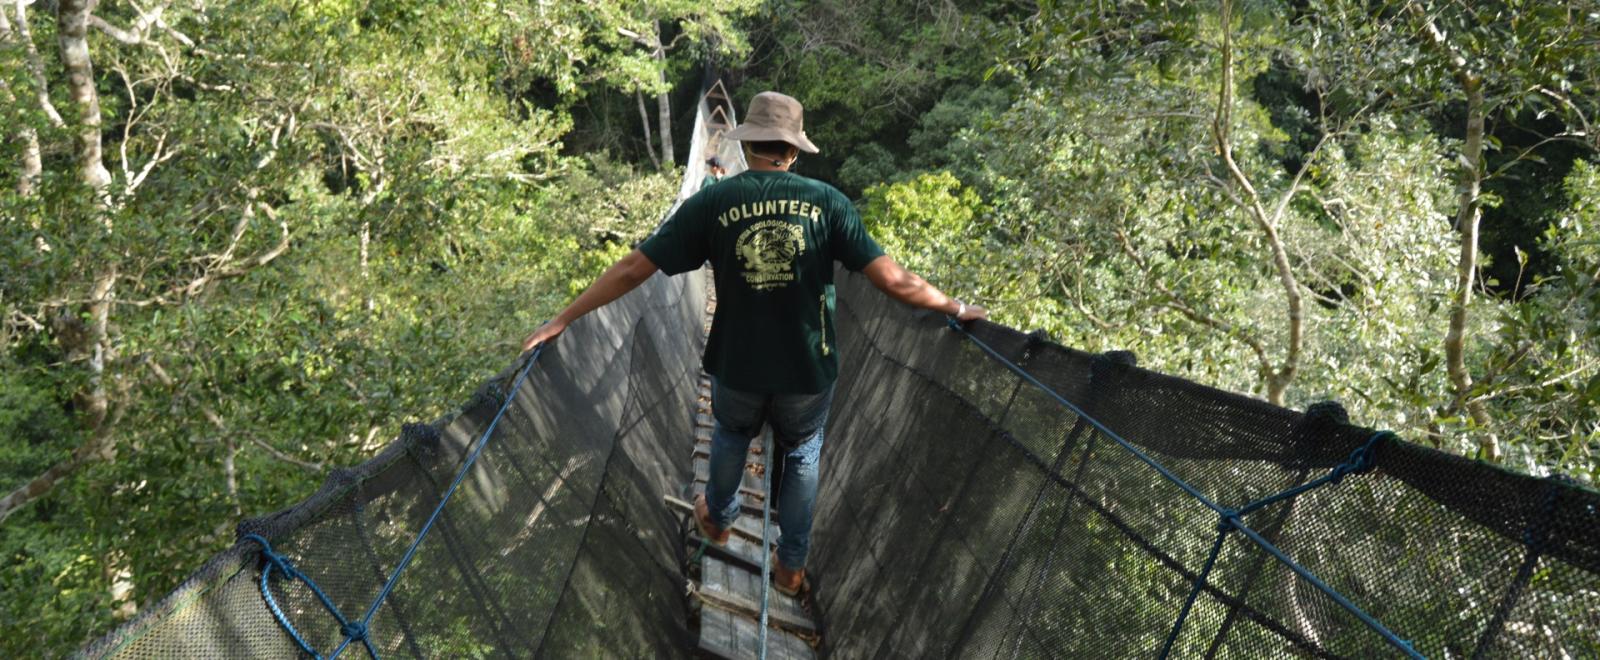 Volunteers on the canopy walkway in the forest